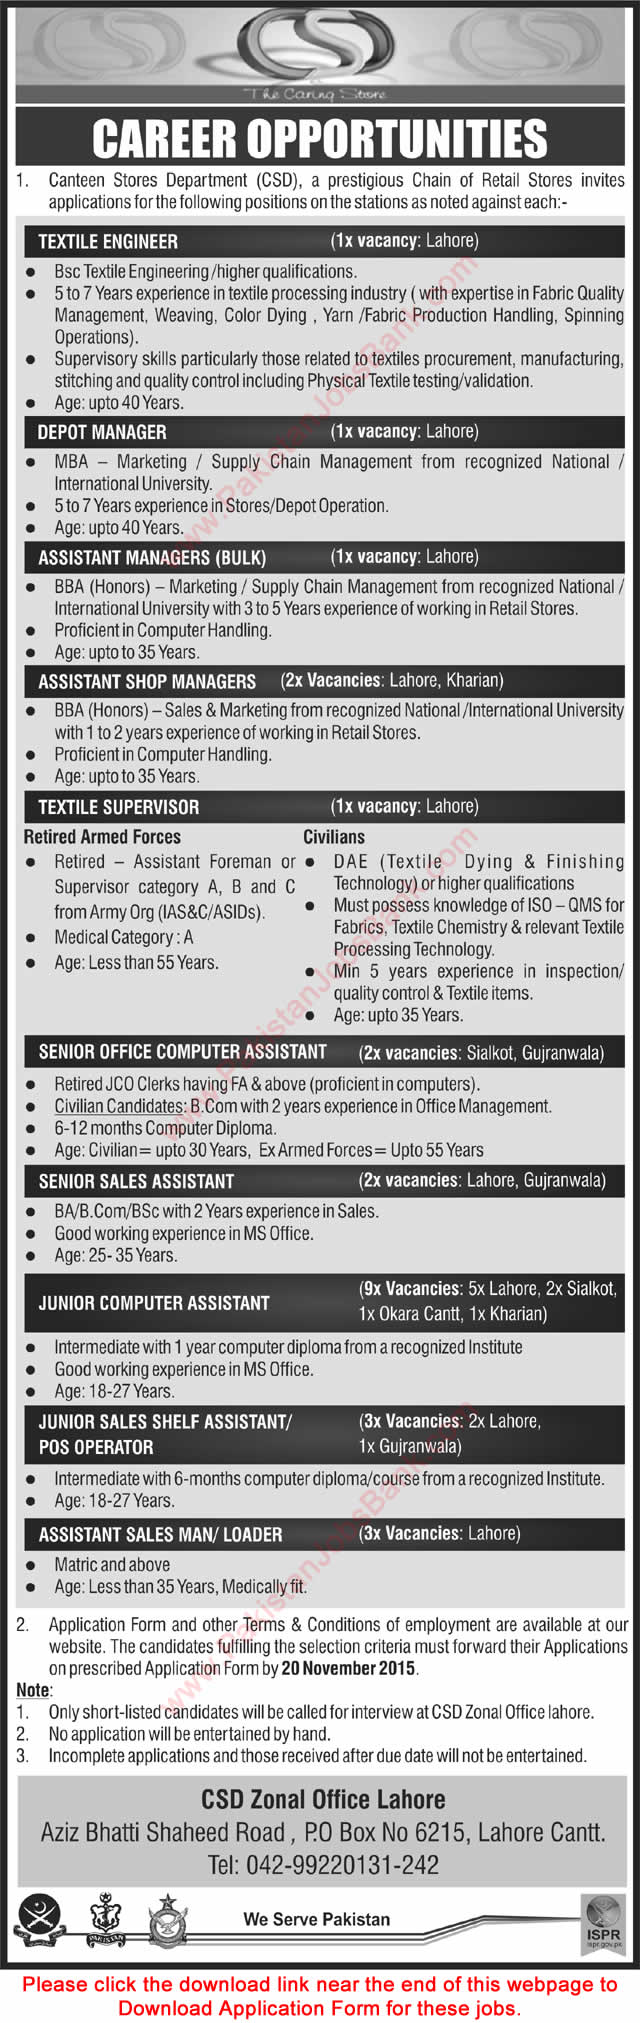 Canteen Stores Department Jobs 2015 November CSD Application Form Download Latest